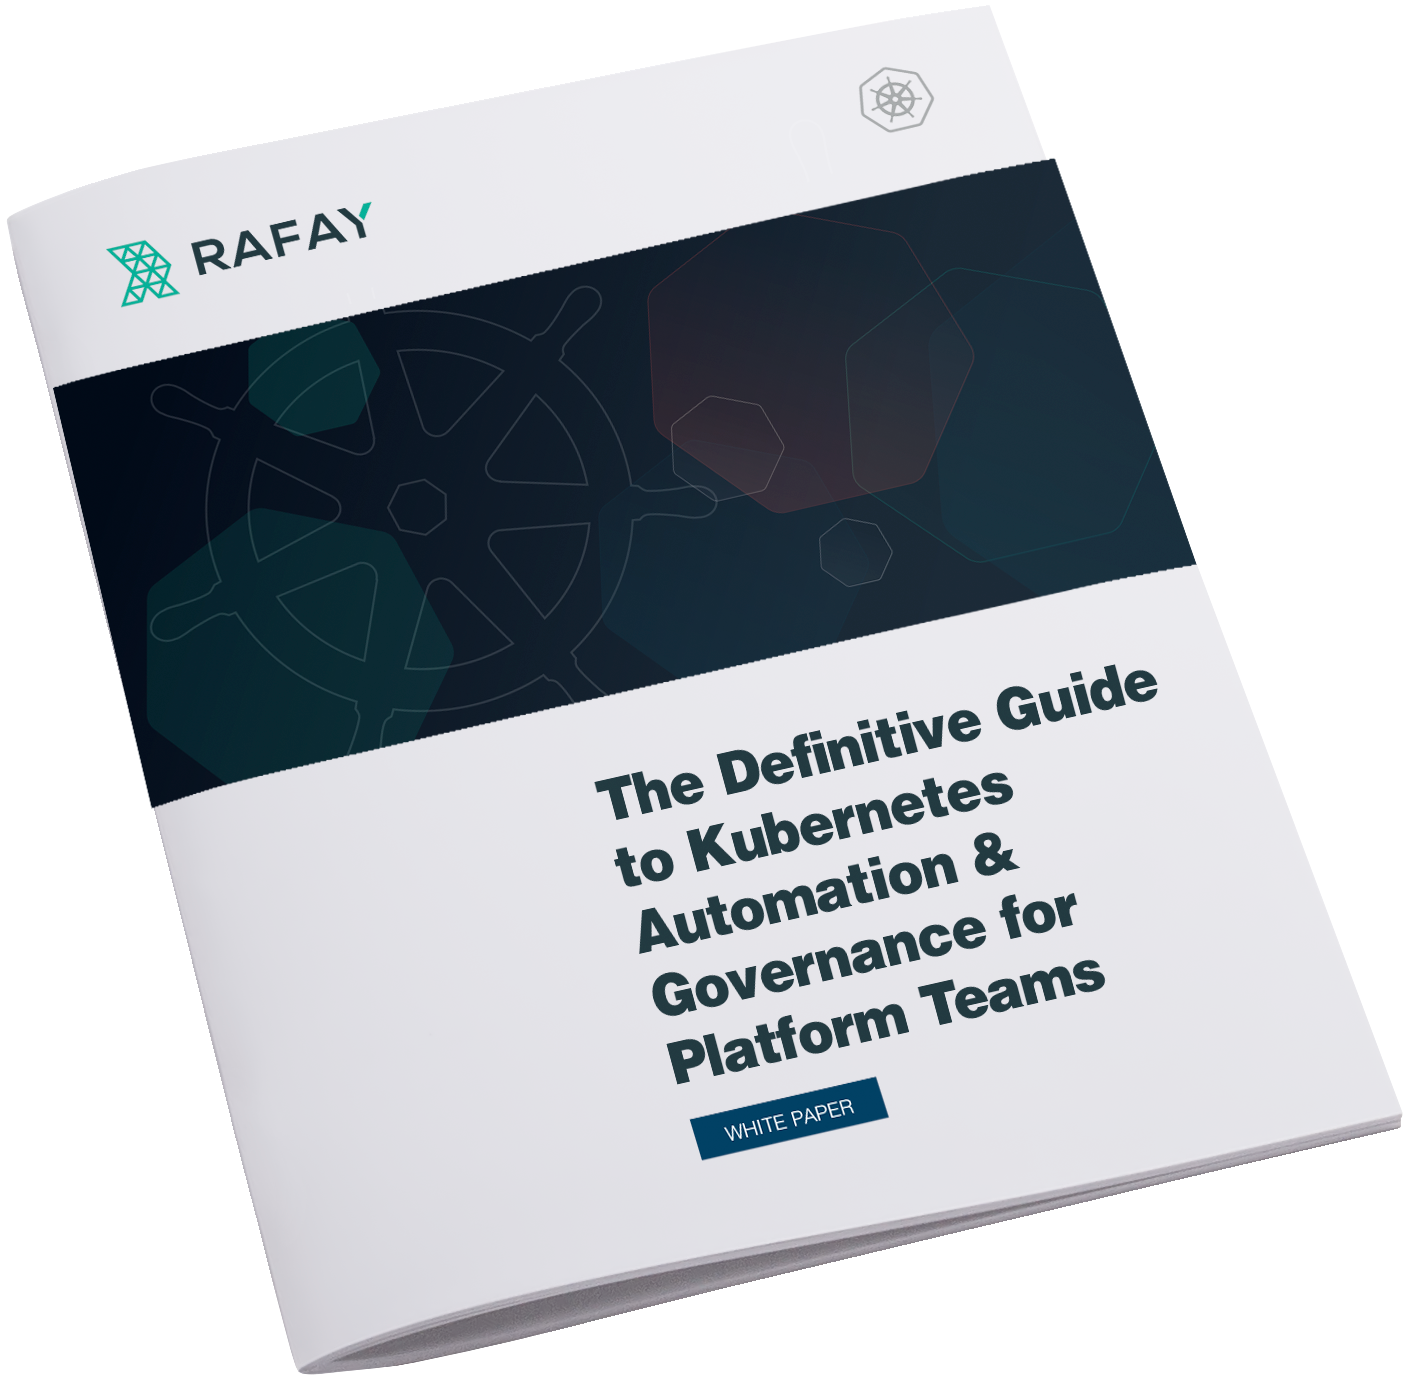 image for The Definitive Guide to Kubernetes Automation and Governance for Platform Teams